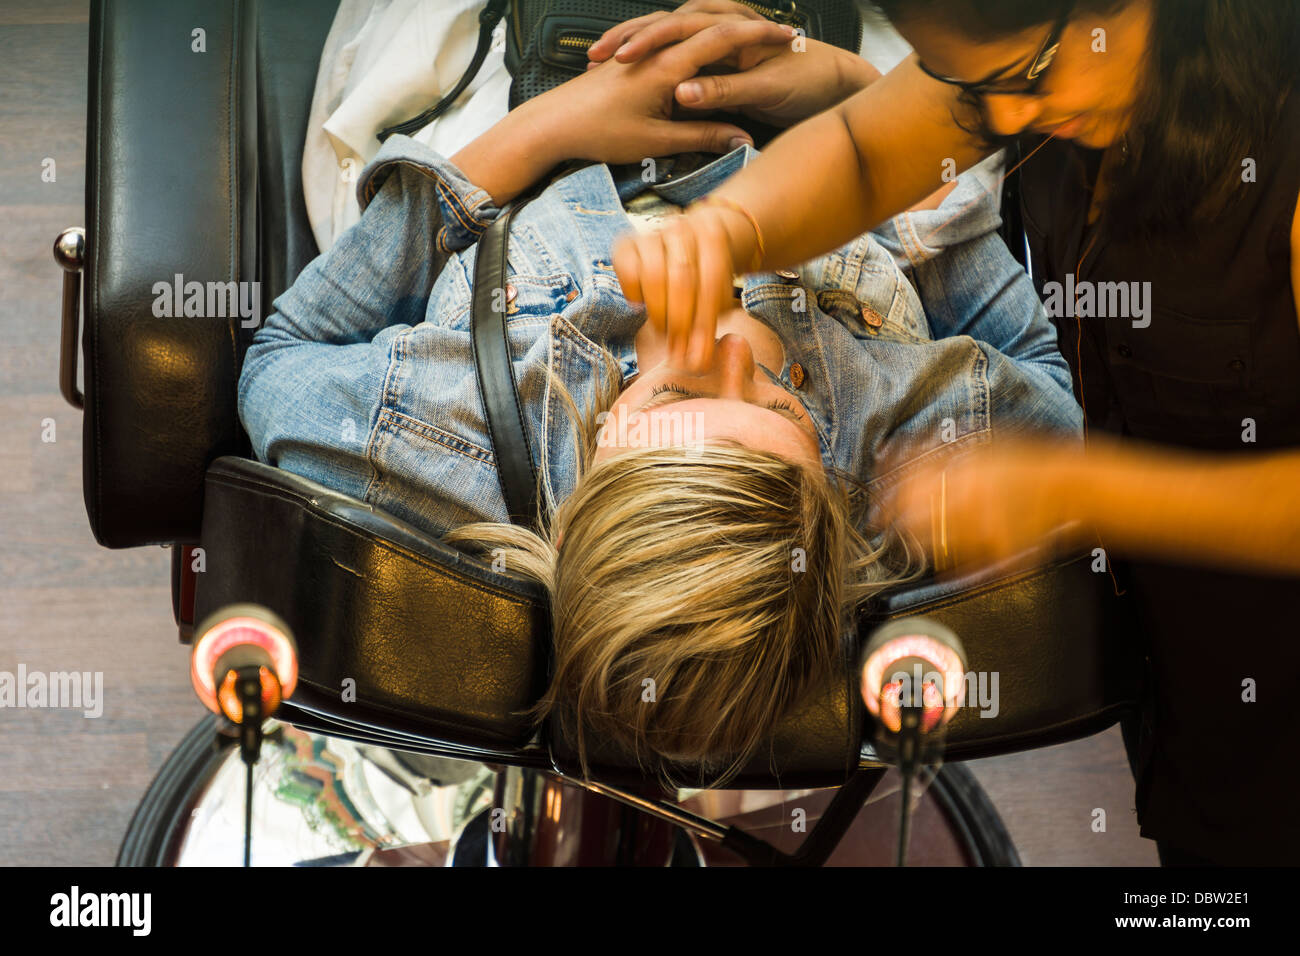 A lady receives a facial beauty treatment from an in store beautician. Stock Photo